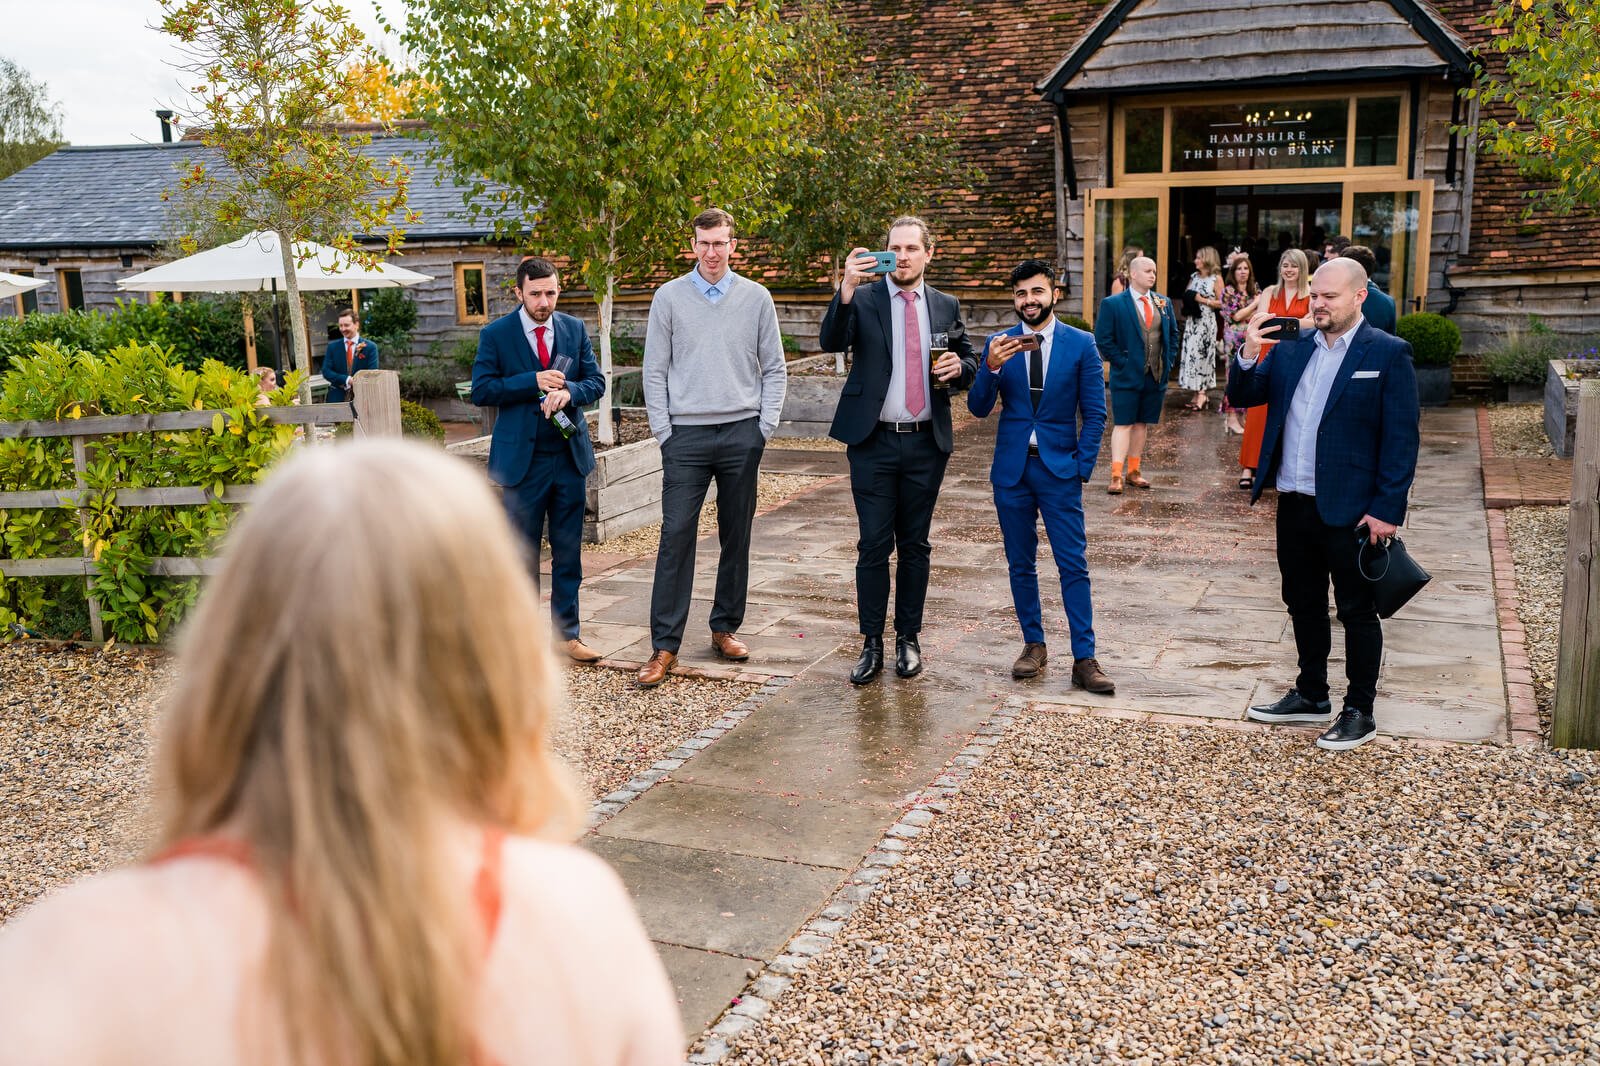 candid photo of guests silchester farm wedding